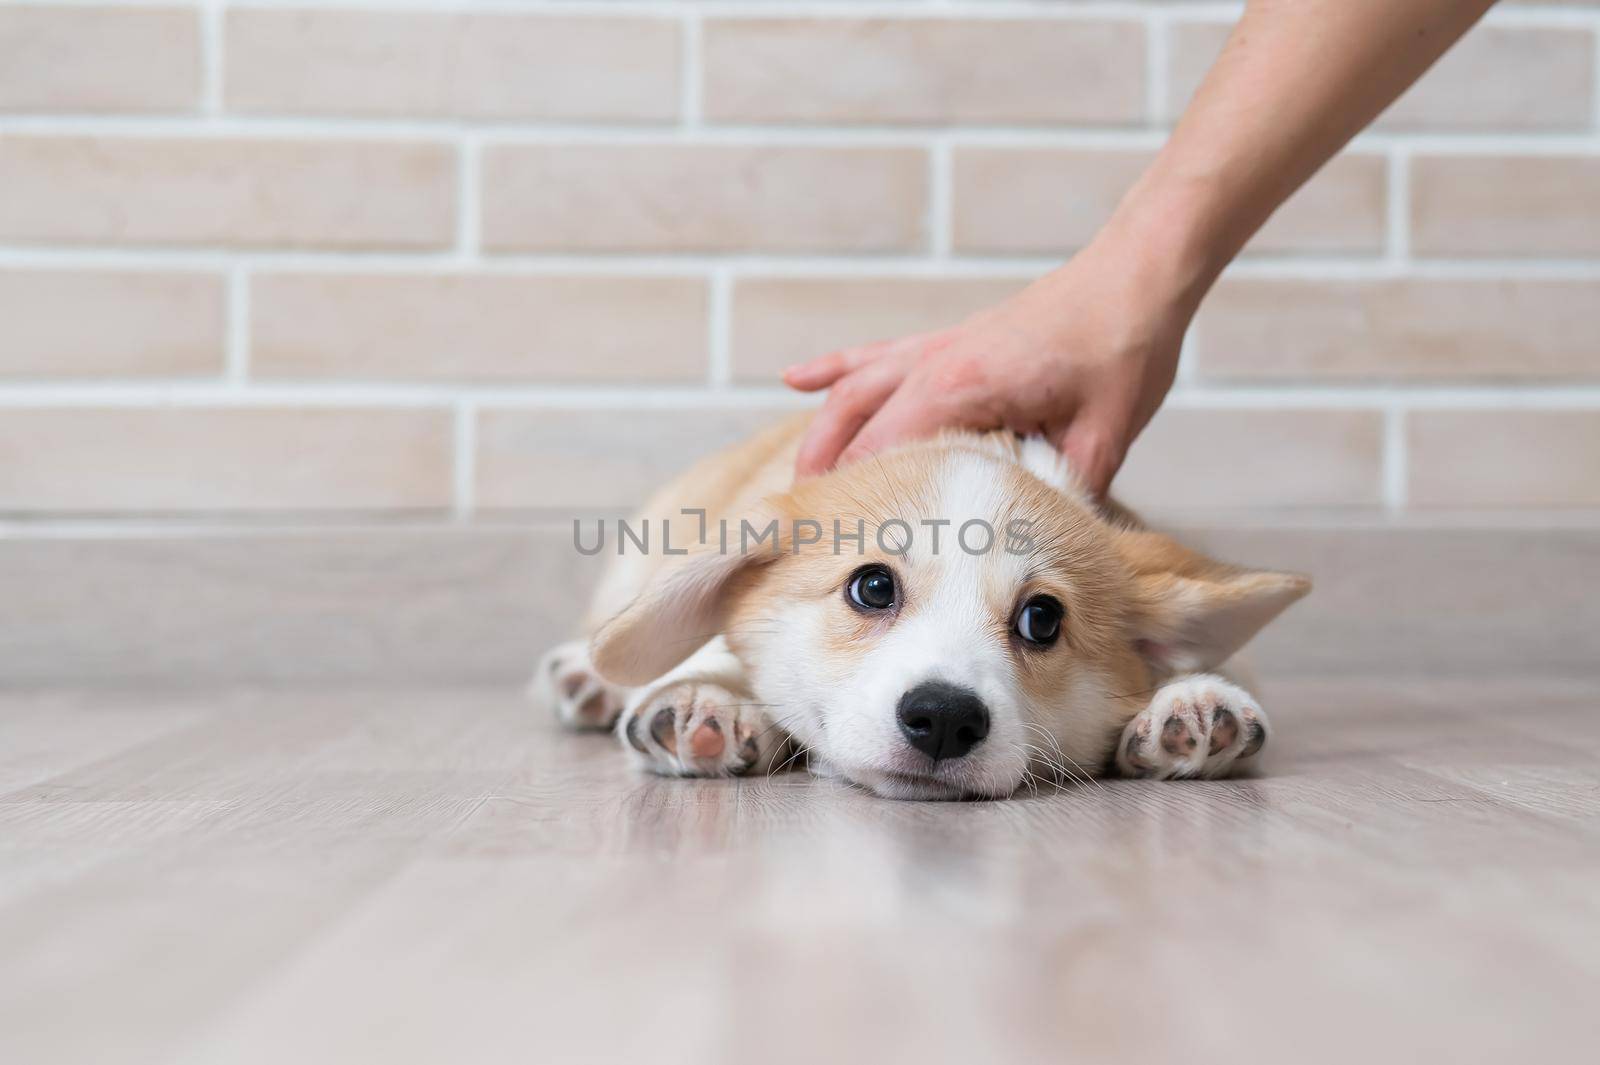 The owner gently strokes the lying Welsh Corgi puppy